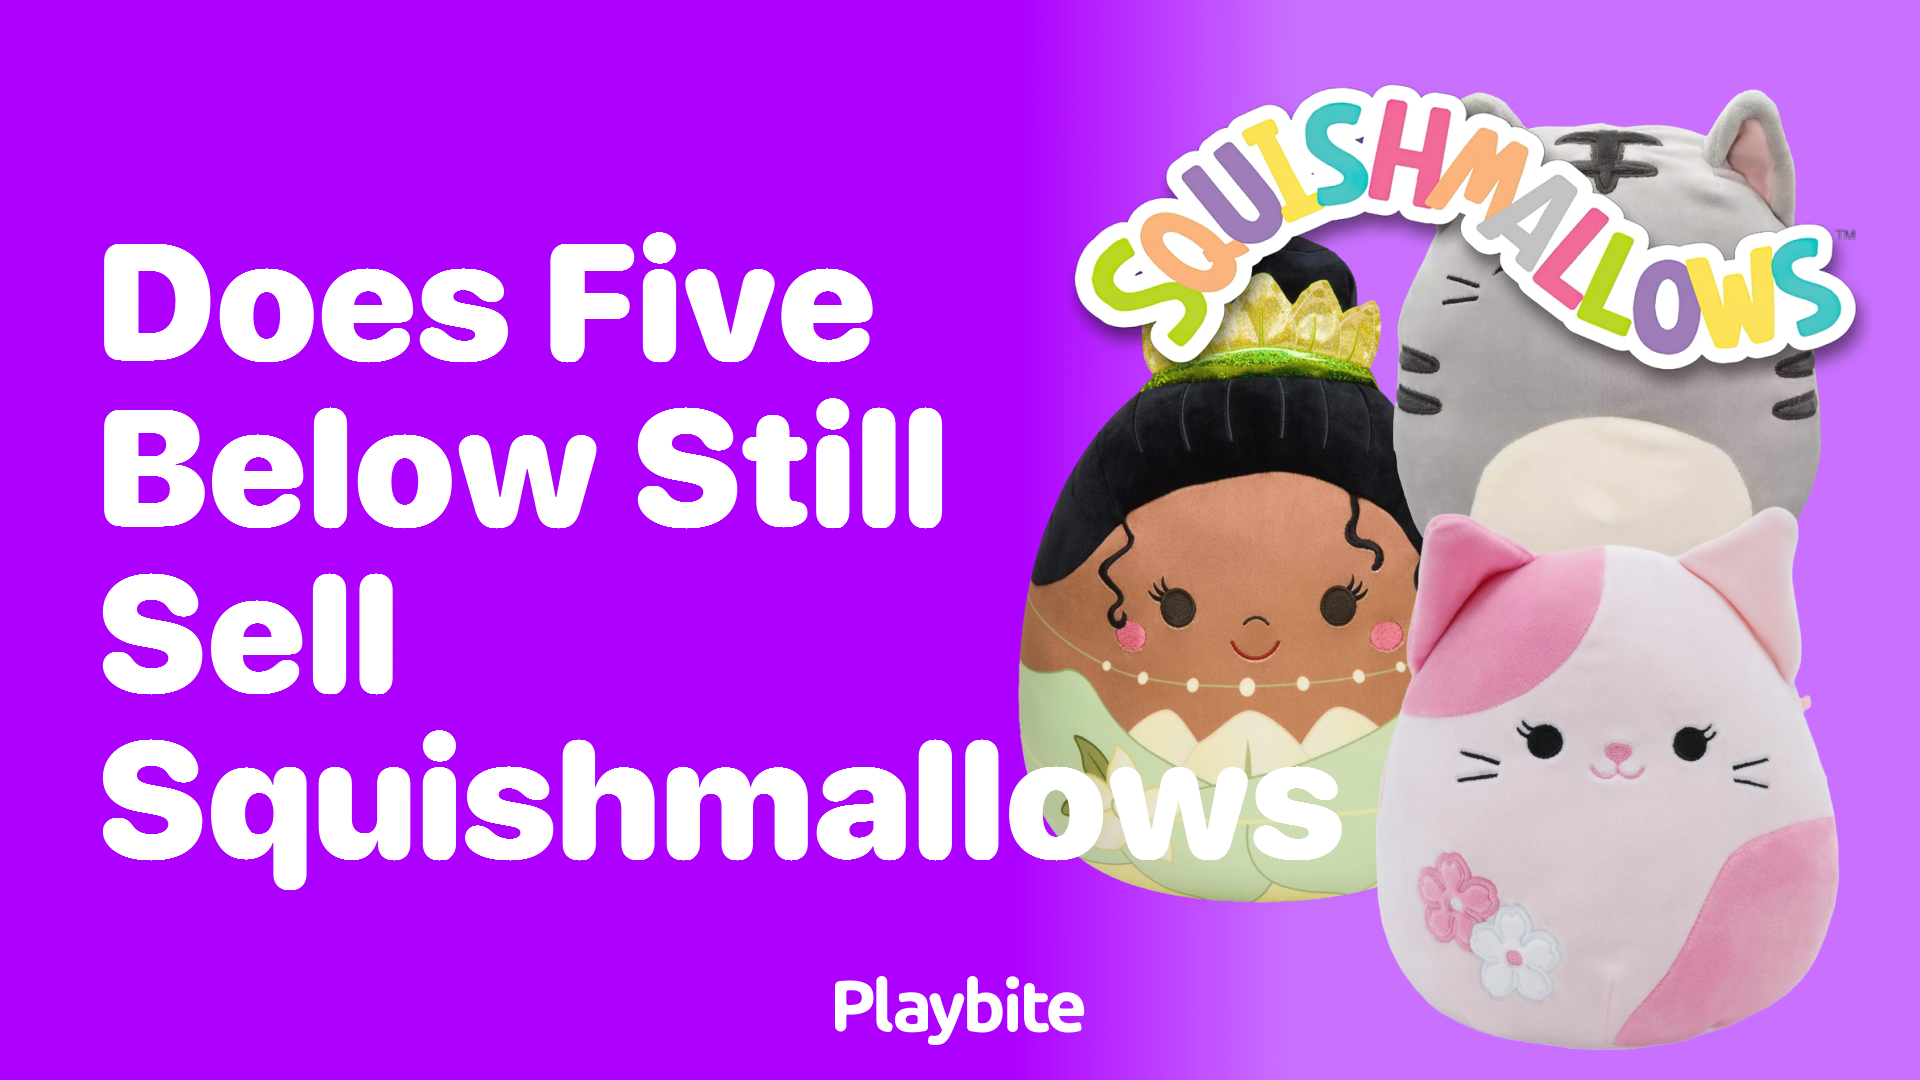 Does Five Below Still Sell Squishmallows? Find Out Here!